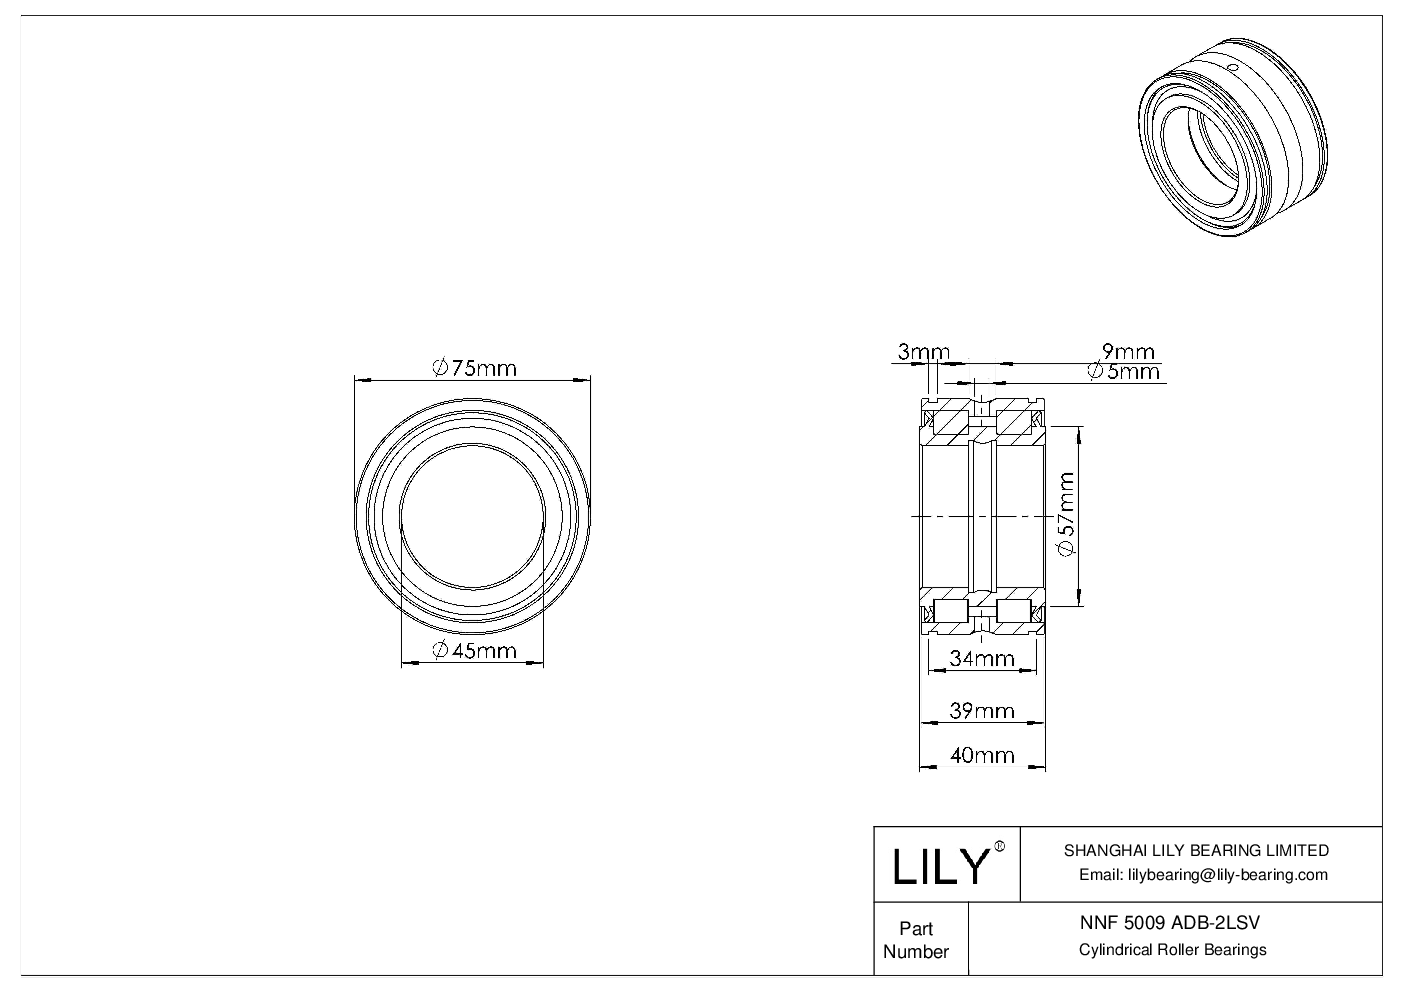 NNF 5009 ADB-2LSV Double Row Full Complement Cylindrical Roller Bearings cad drawing